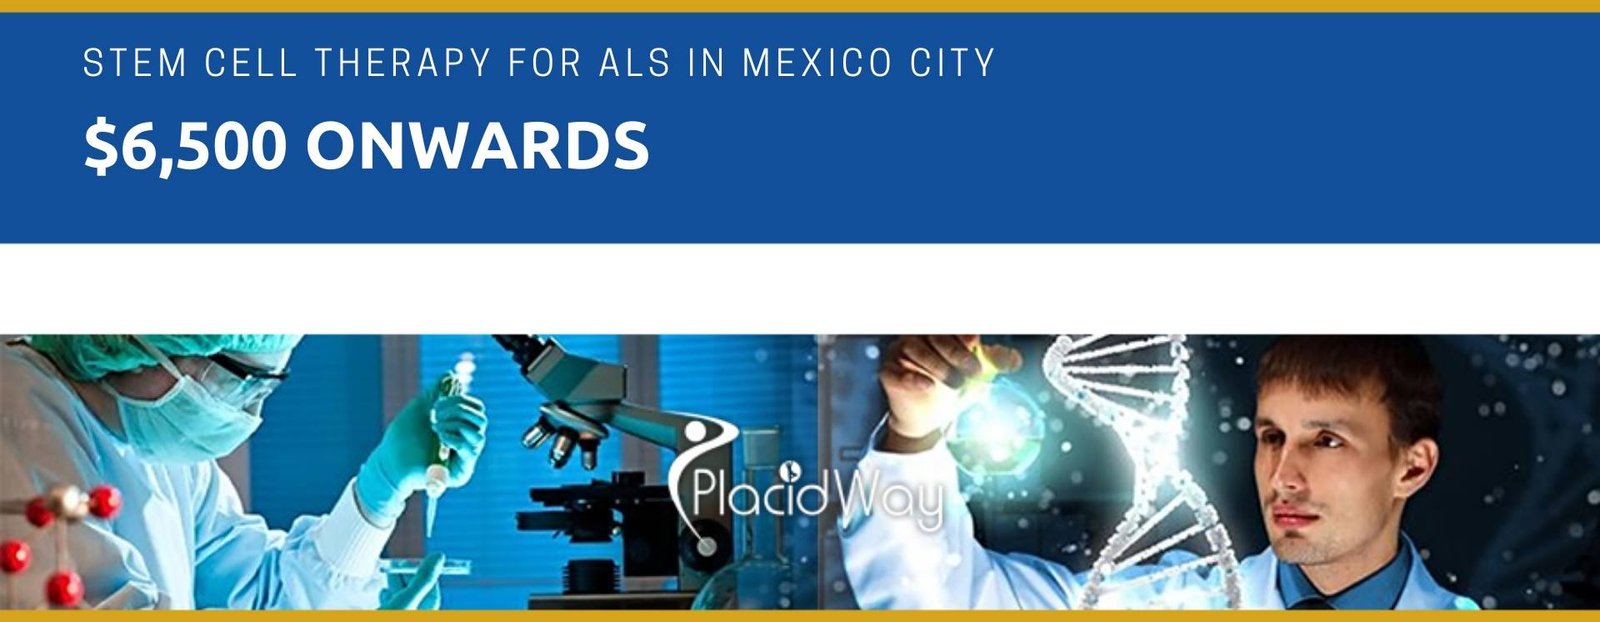 Stem-Cell-Therapy-for-ALS-cost-in-Mexico-